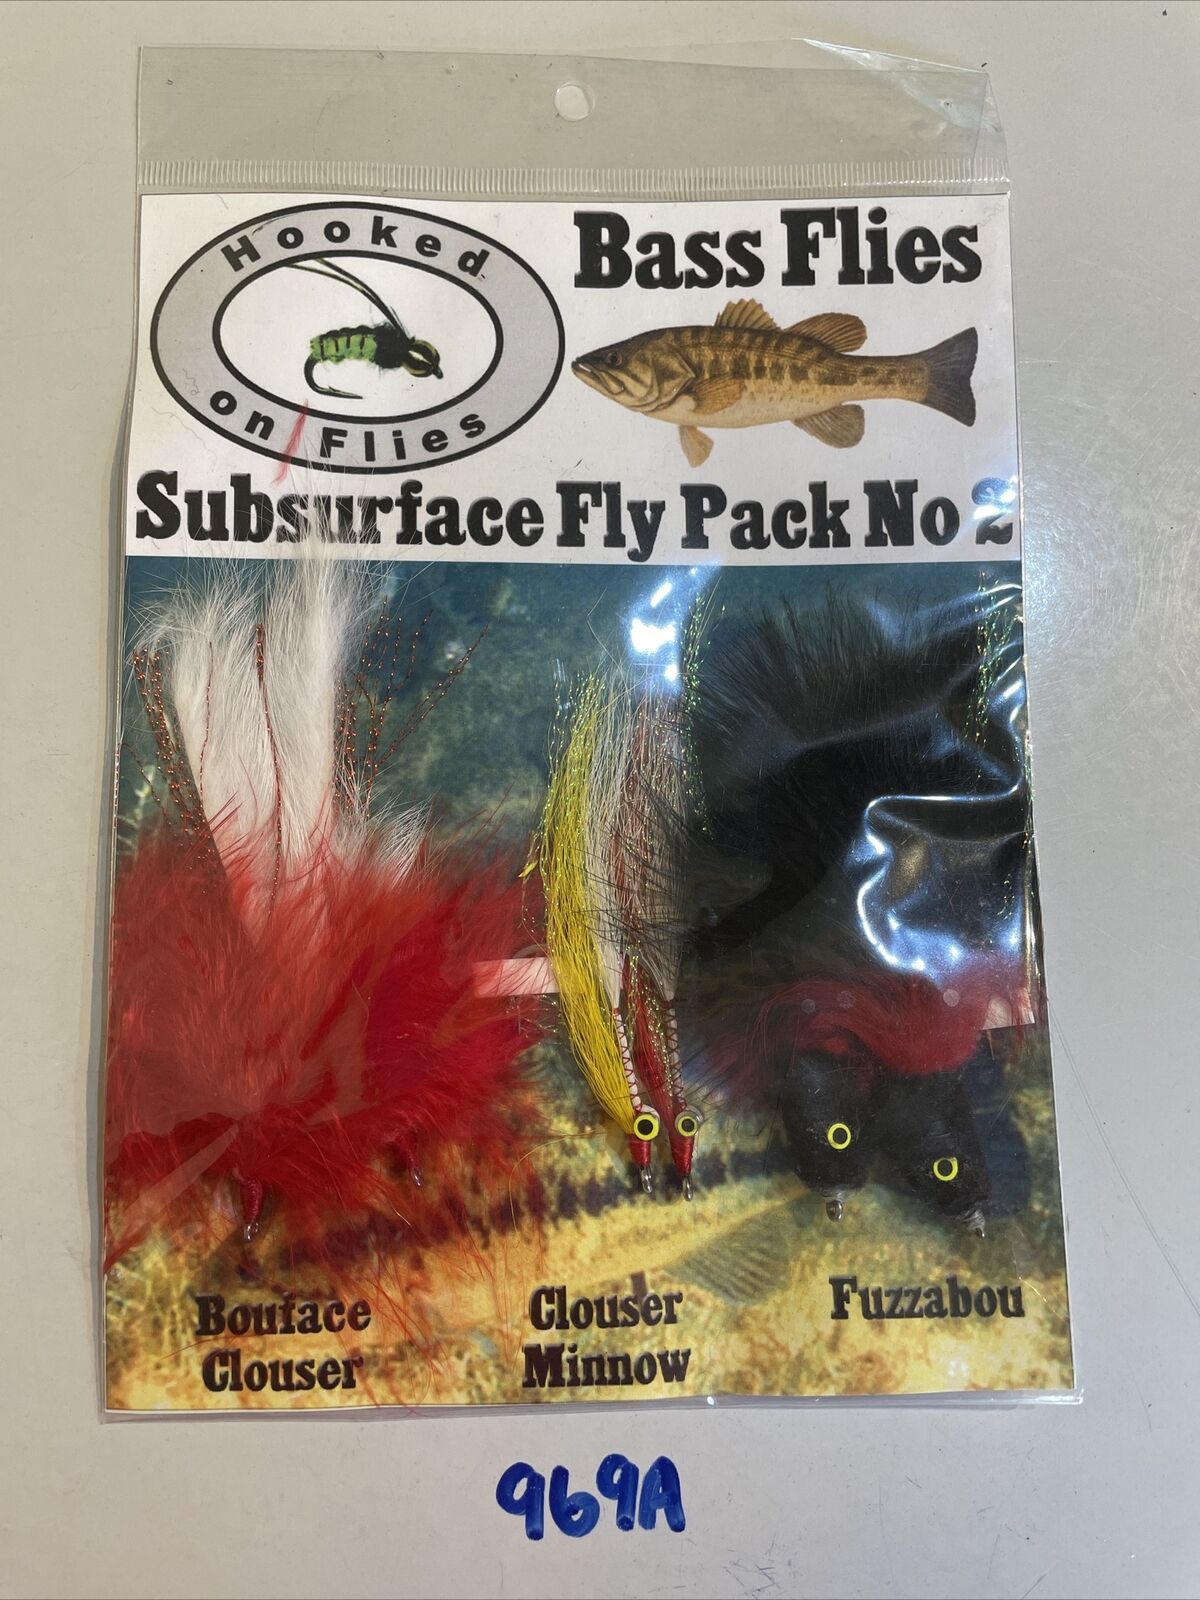 Bass Flies Subsurfce Fly Pack No 2 Game Fishing Flies x 6